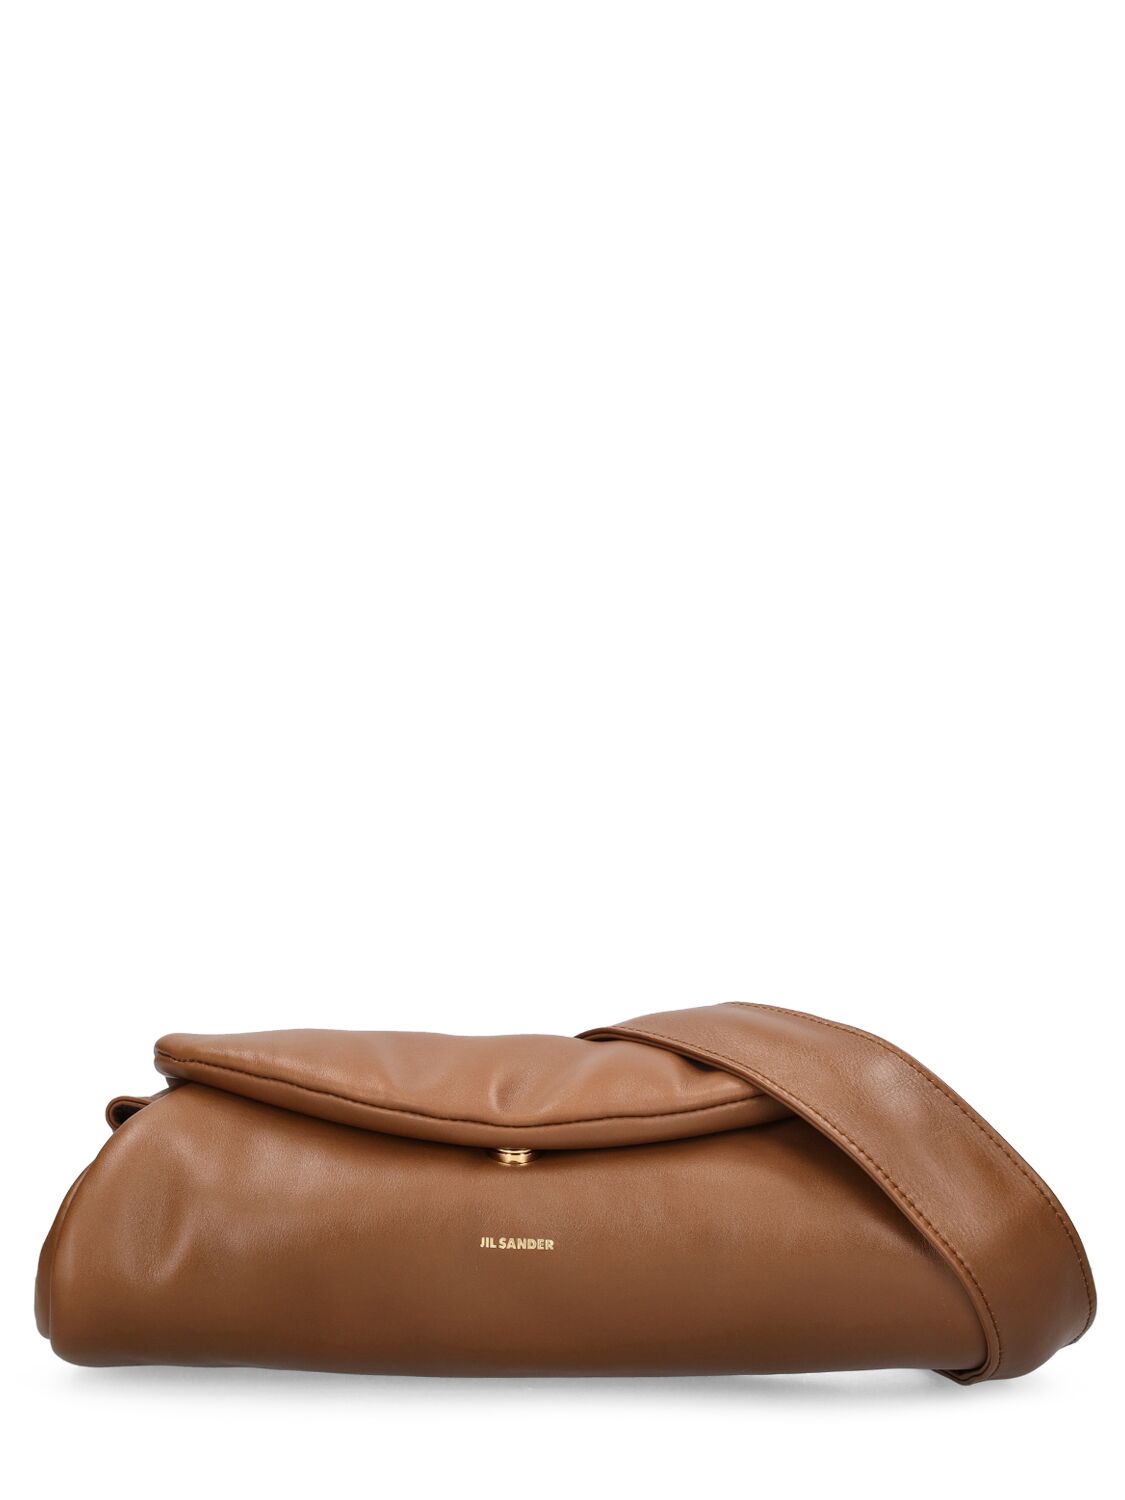 Image of Small Cannolo Padded Leather Bag